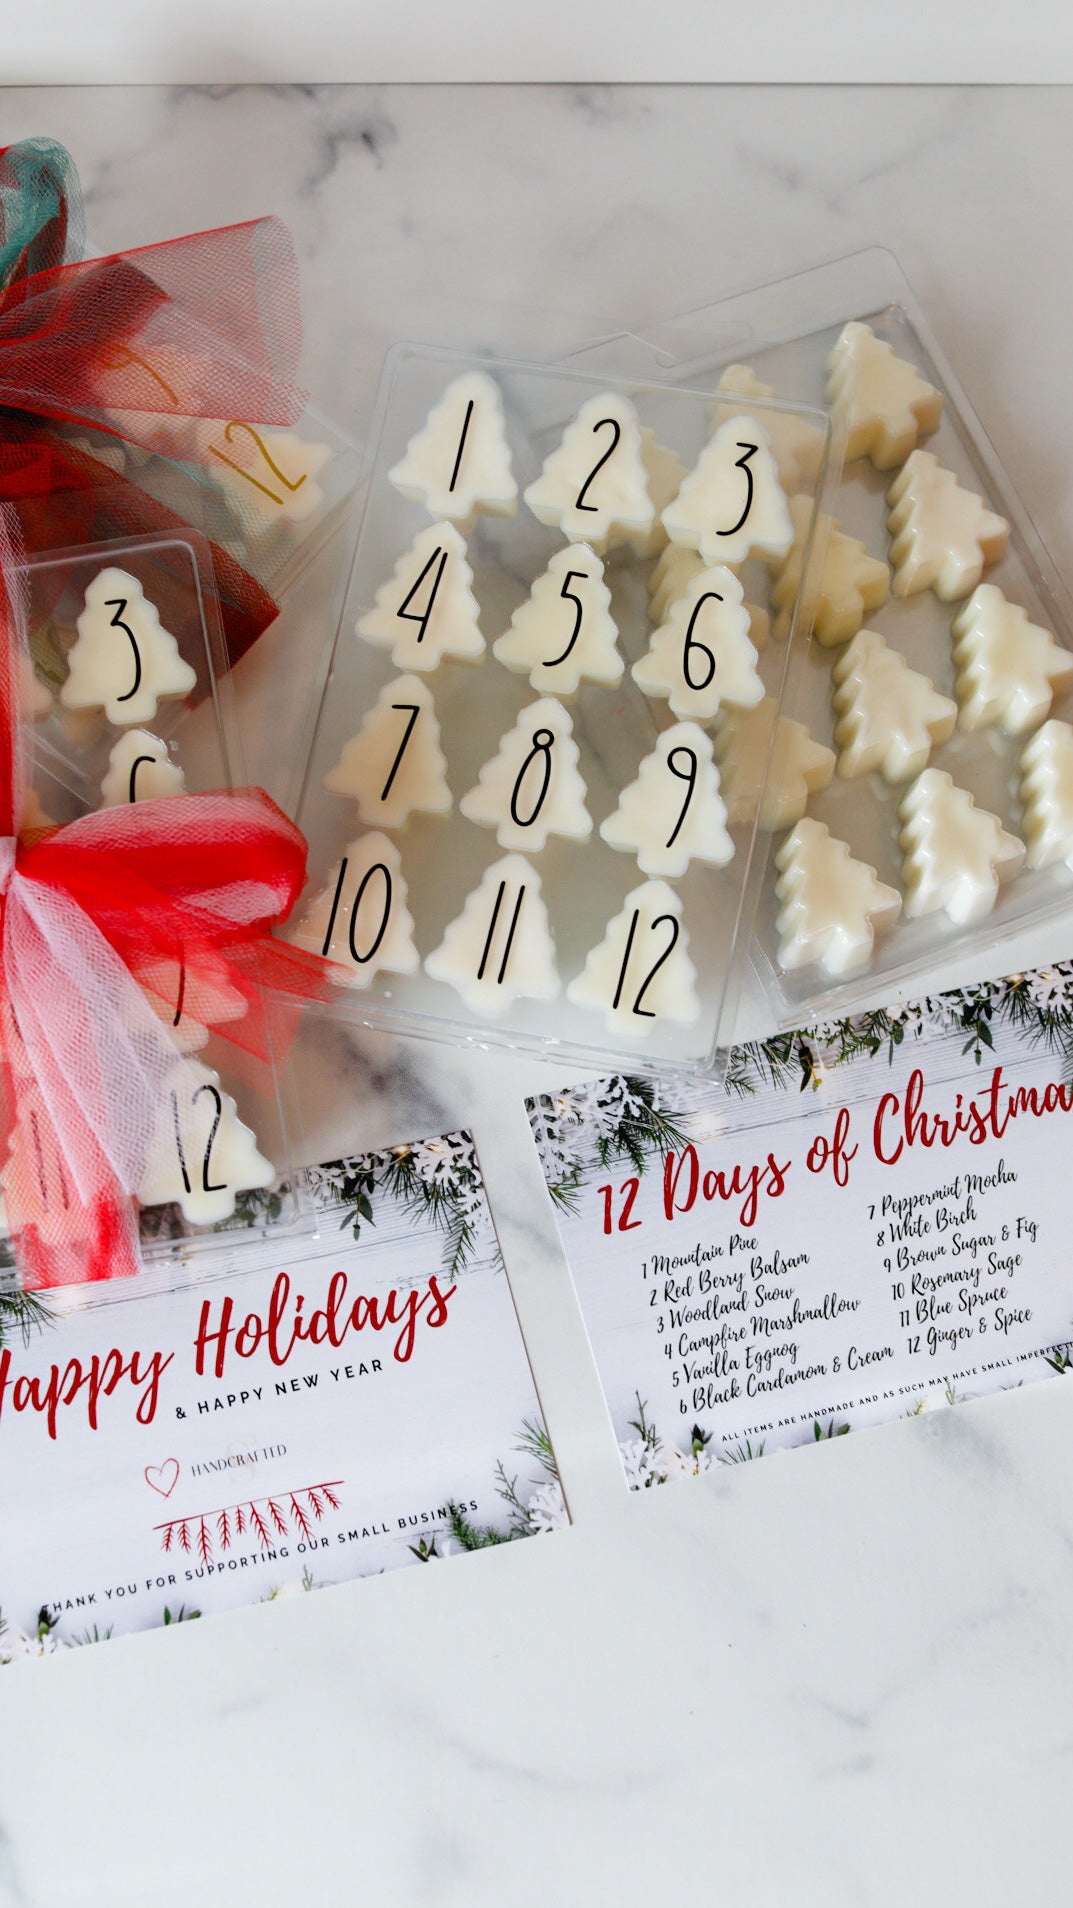 12 Days of Christmas Wax Melts